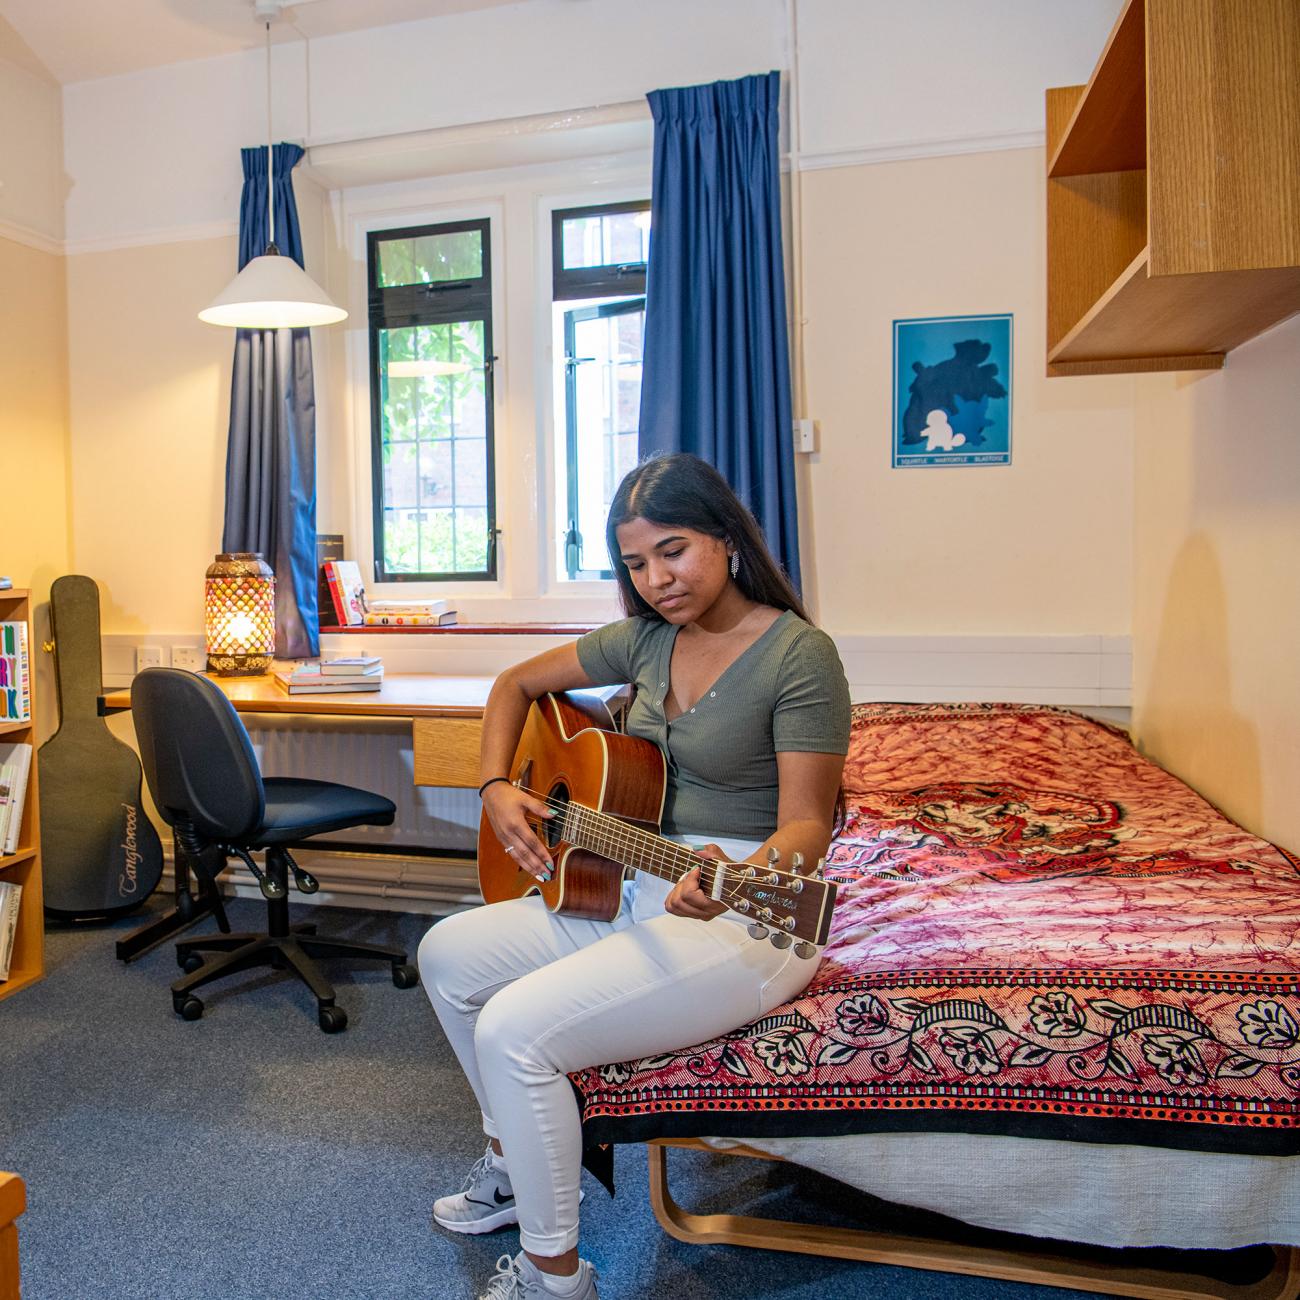 A student plays a guitar while sitting on a bed in a bedroom. In the background, shelves and a desk with books can be seen.